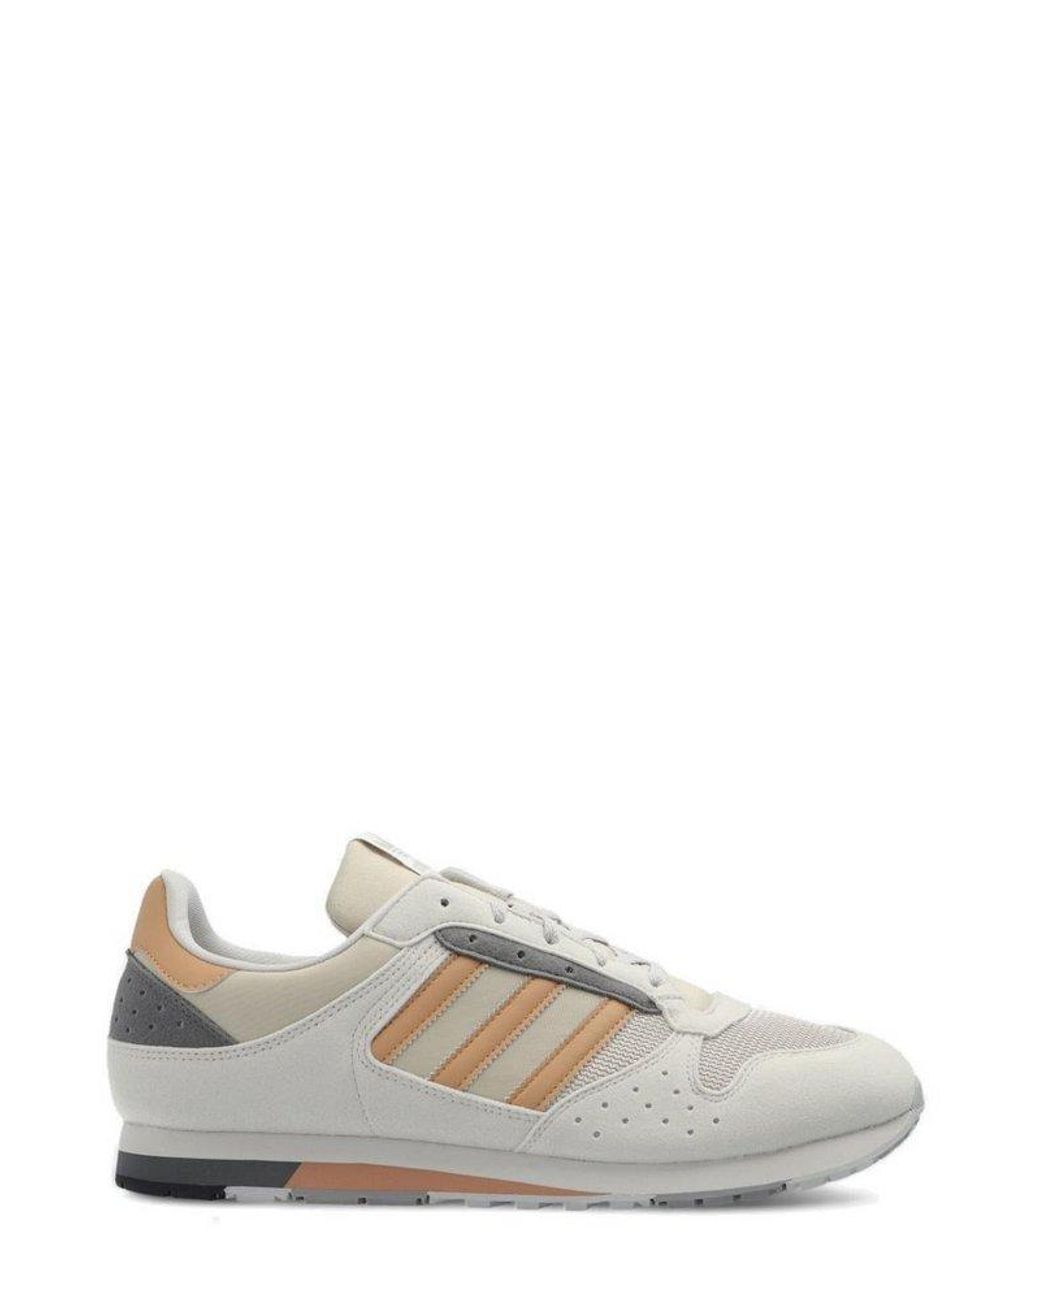 adidas Originals Zx 620 Spzl Lace-up Sneakers in White for Men | Lyst